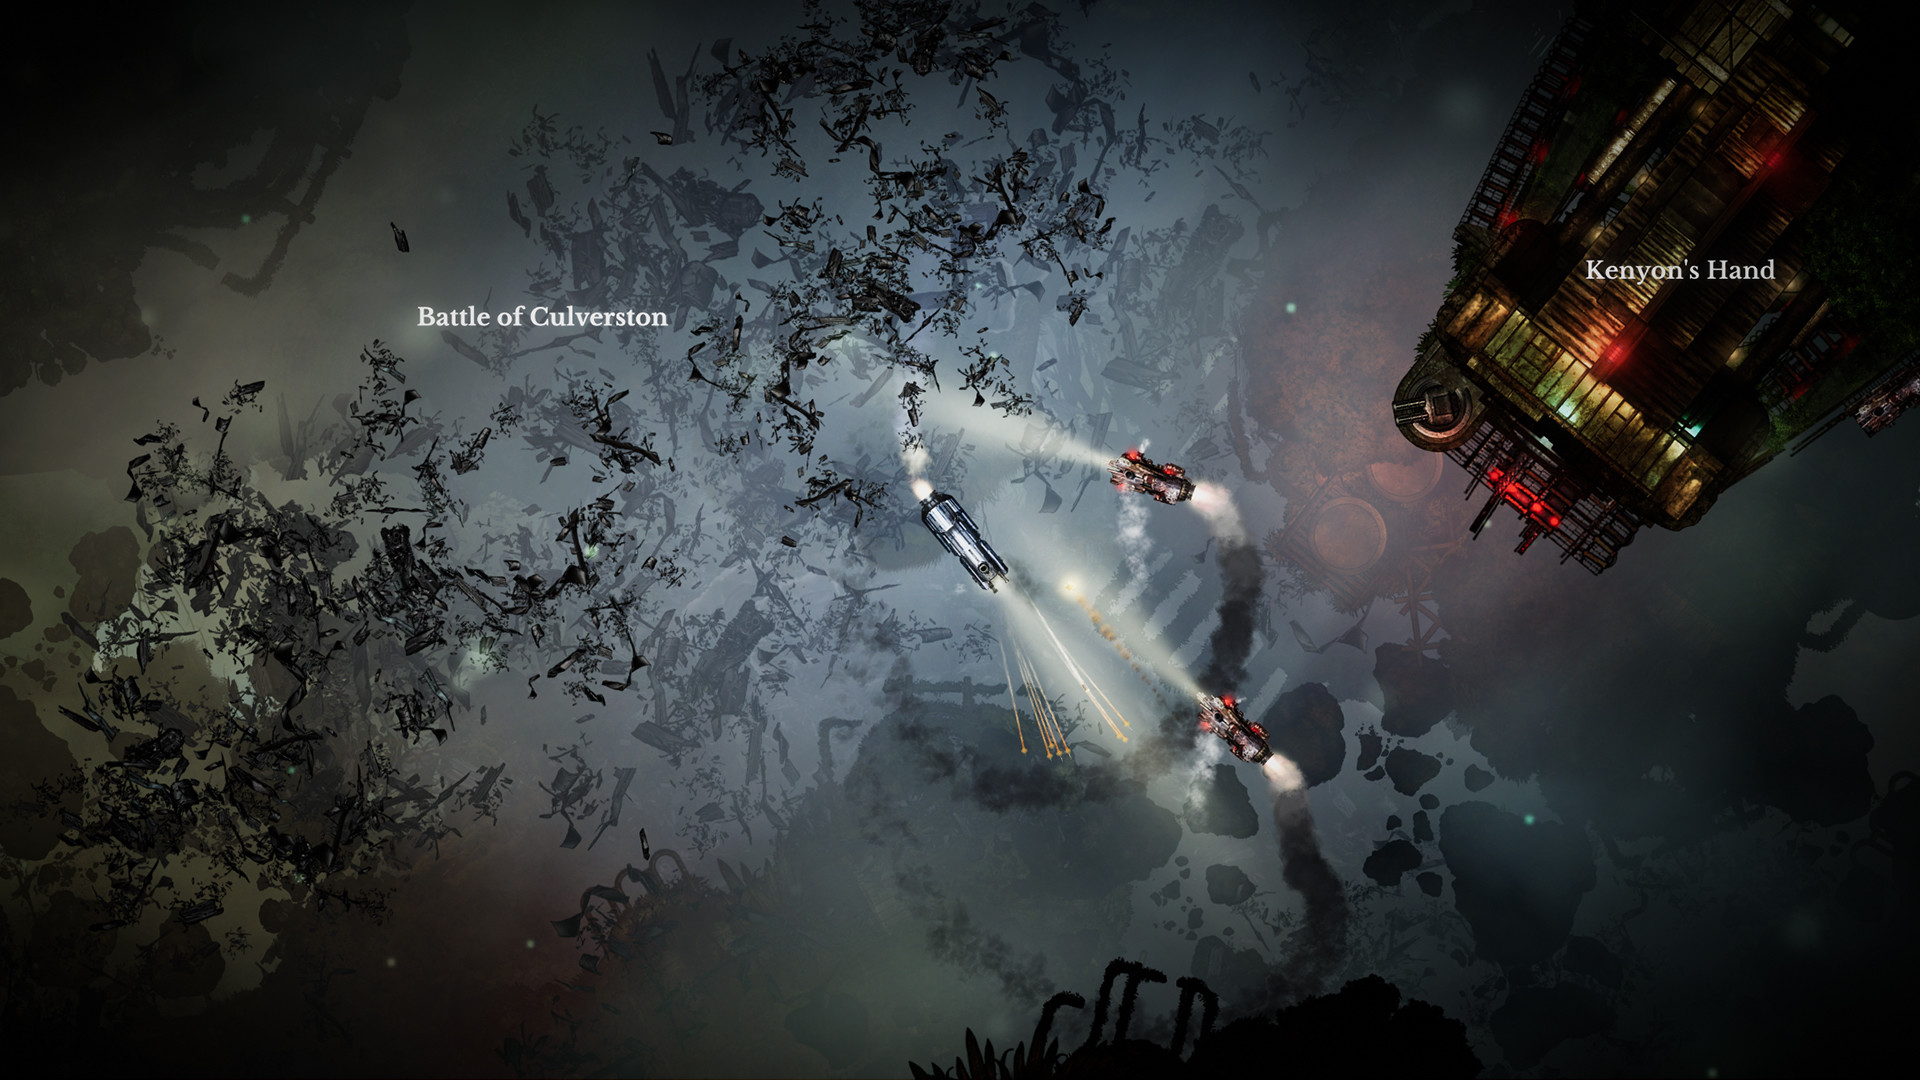 Sunless Skies: Sovereign Edition no Steam